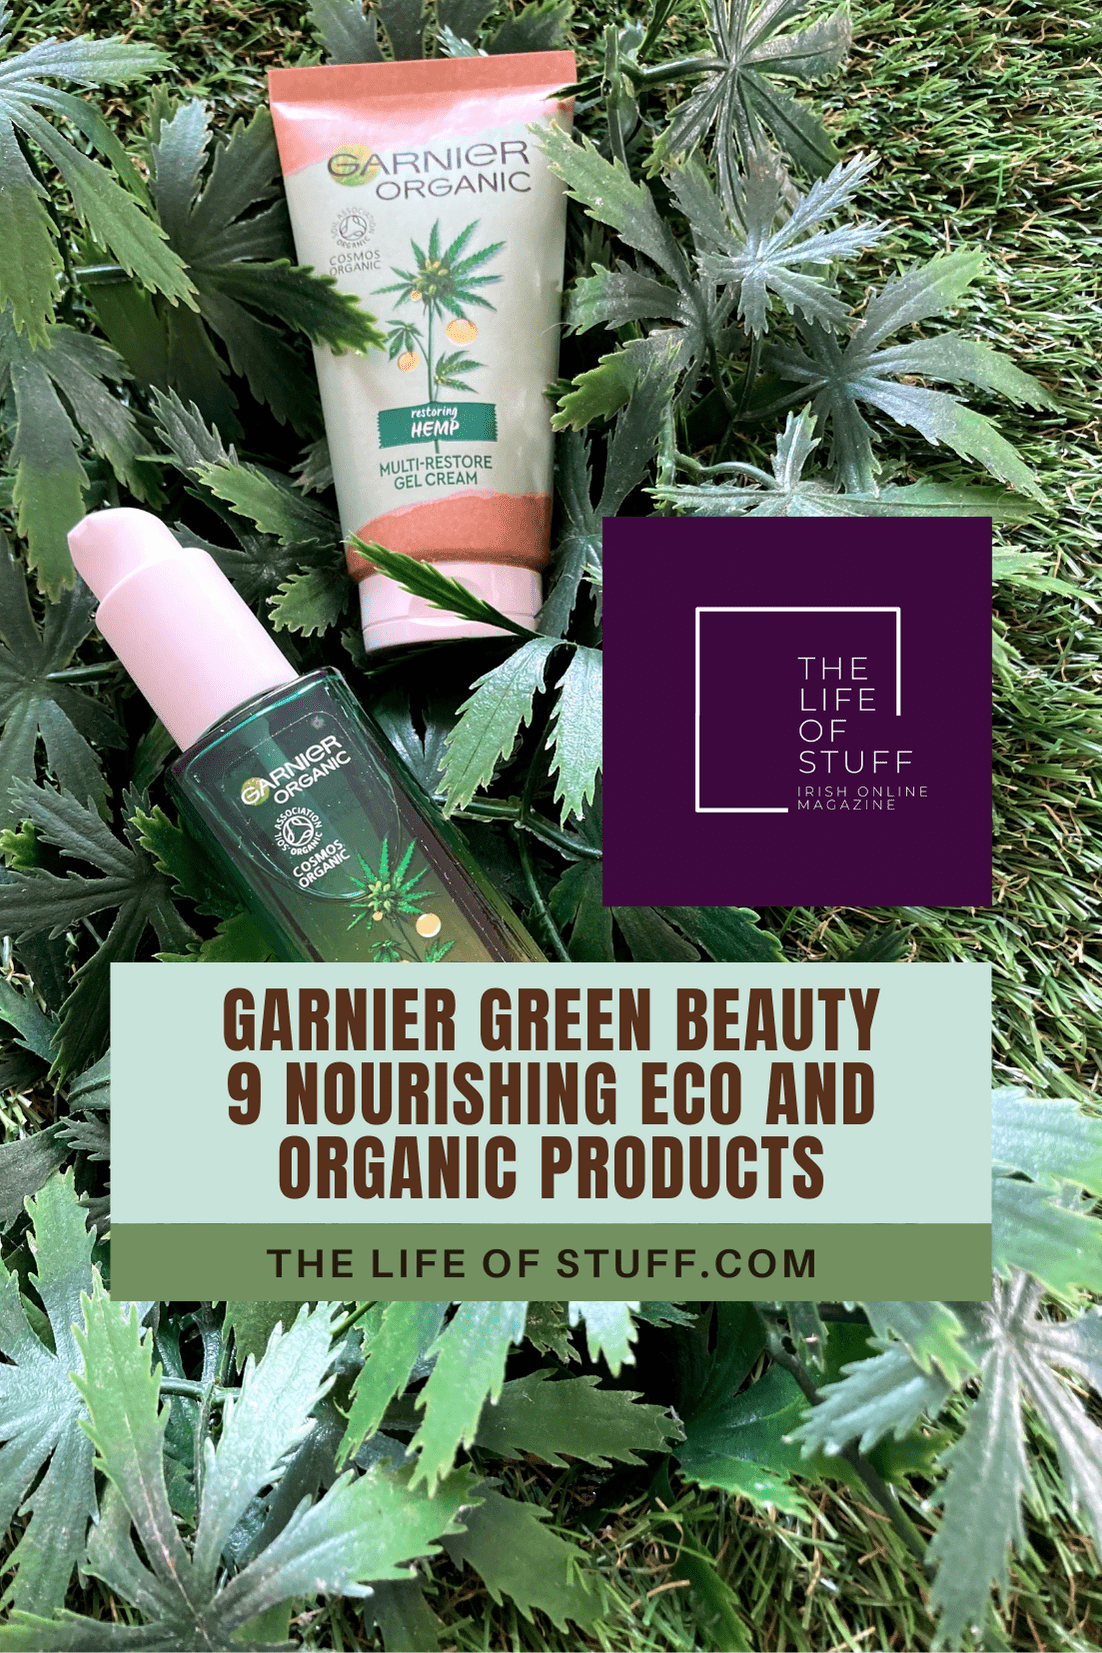 Garnier Green Beauty – 9 Nourishing Eco and Organic Products on The Life of Stuff